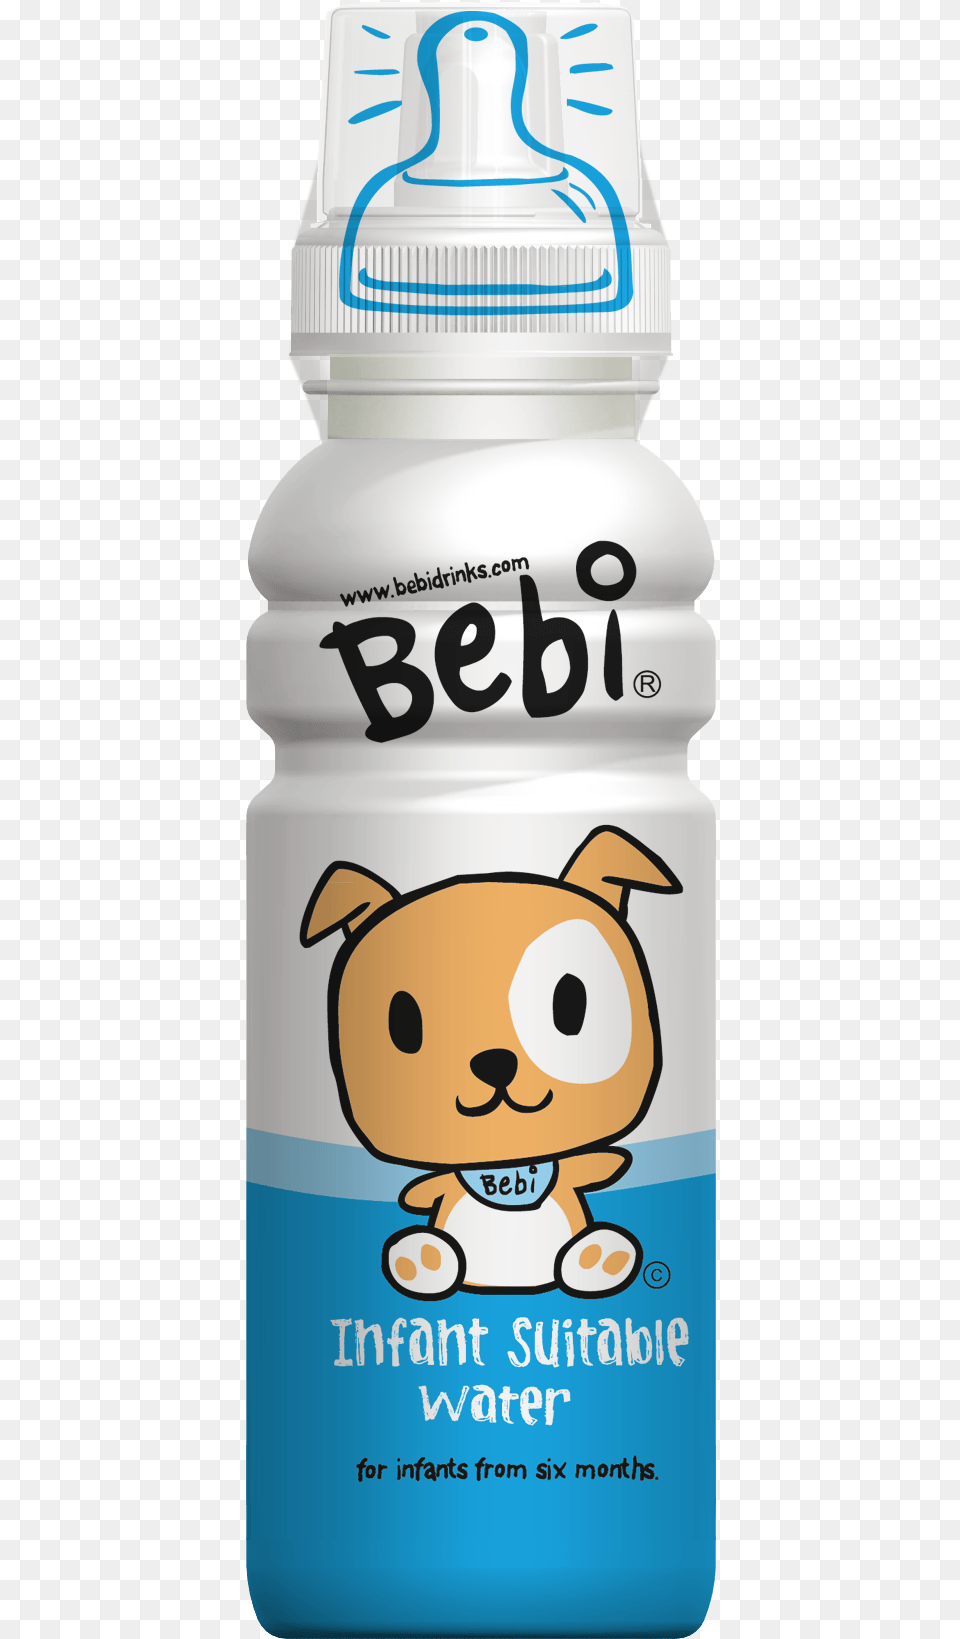 Water Ready To Drink Baby Formula, Bottle Png Image